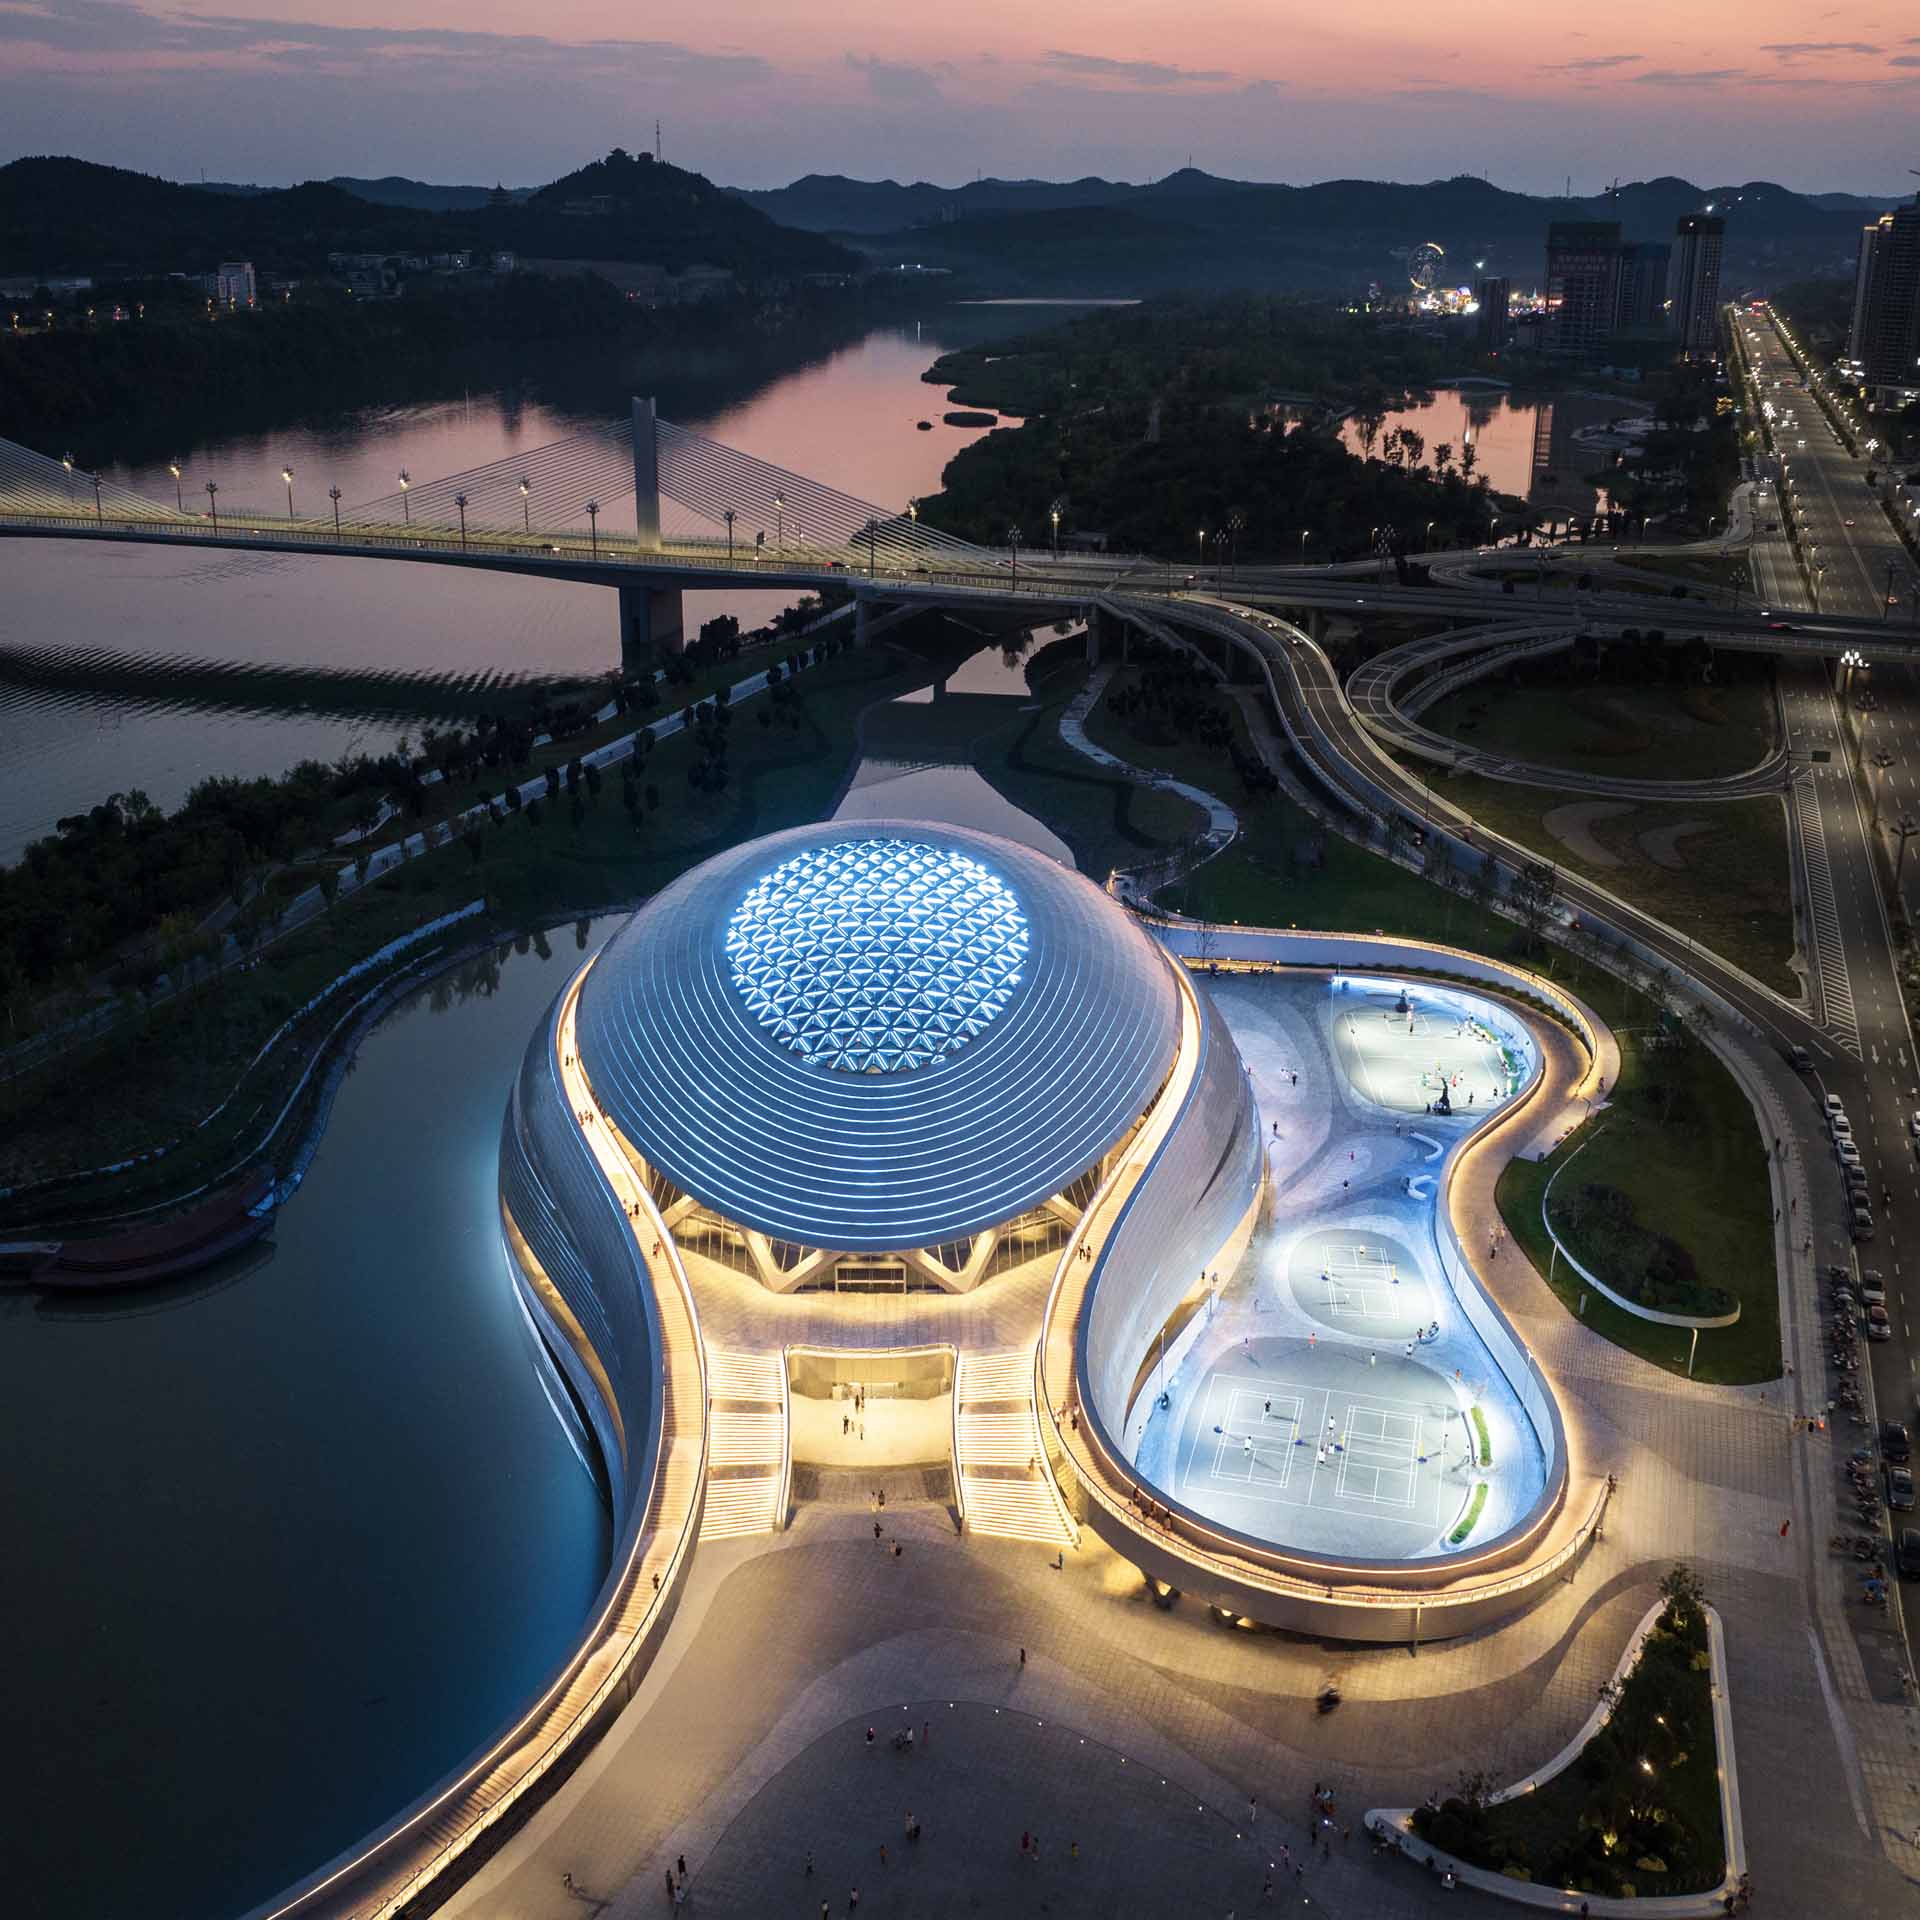 Located by the Jialing River, this gymnasium achieves harmony, openness, and interaction with nature. The overall project is conceived as an earthscape, just like a picture scroll, while city and nature are merged, with the architecture and landscape combined creating a continuous spatial sequence formed along the waterfront.